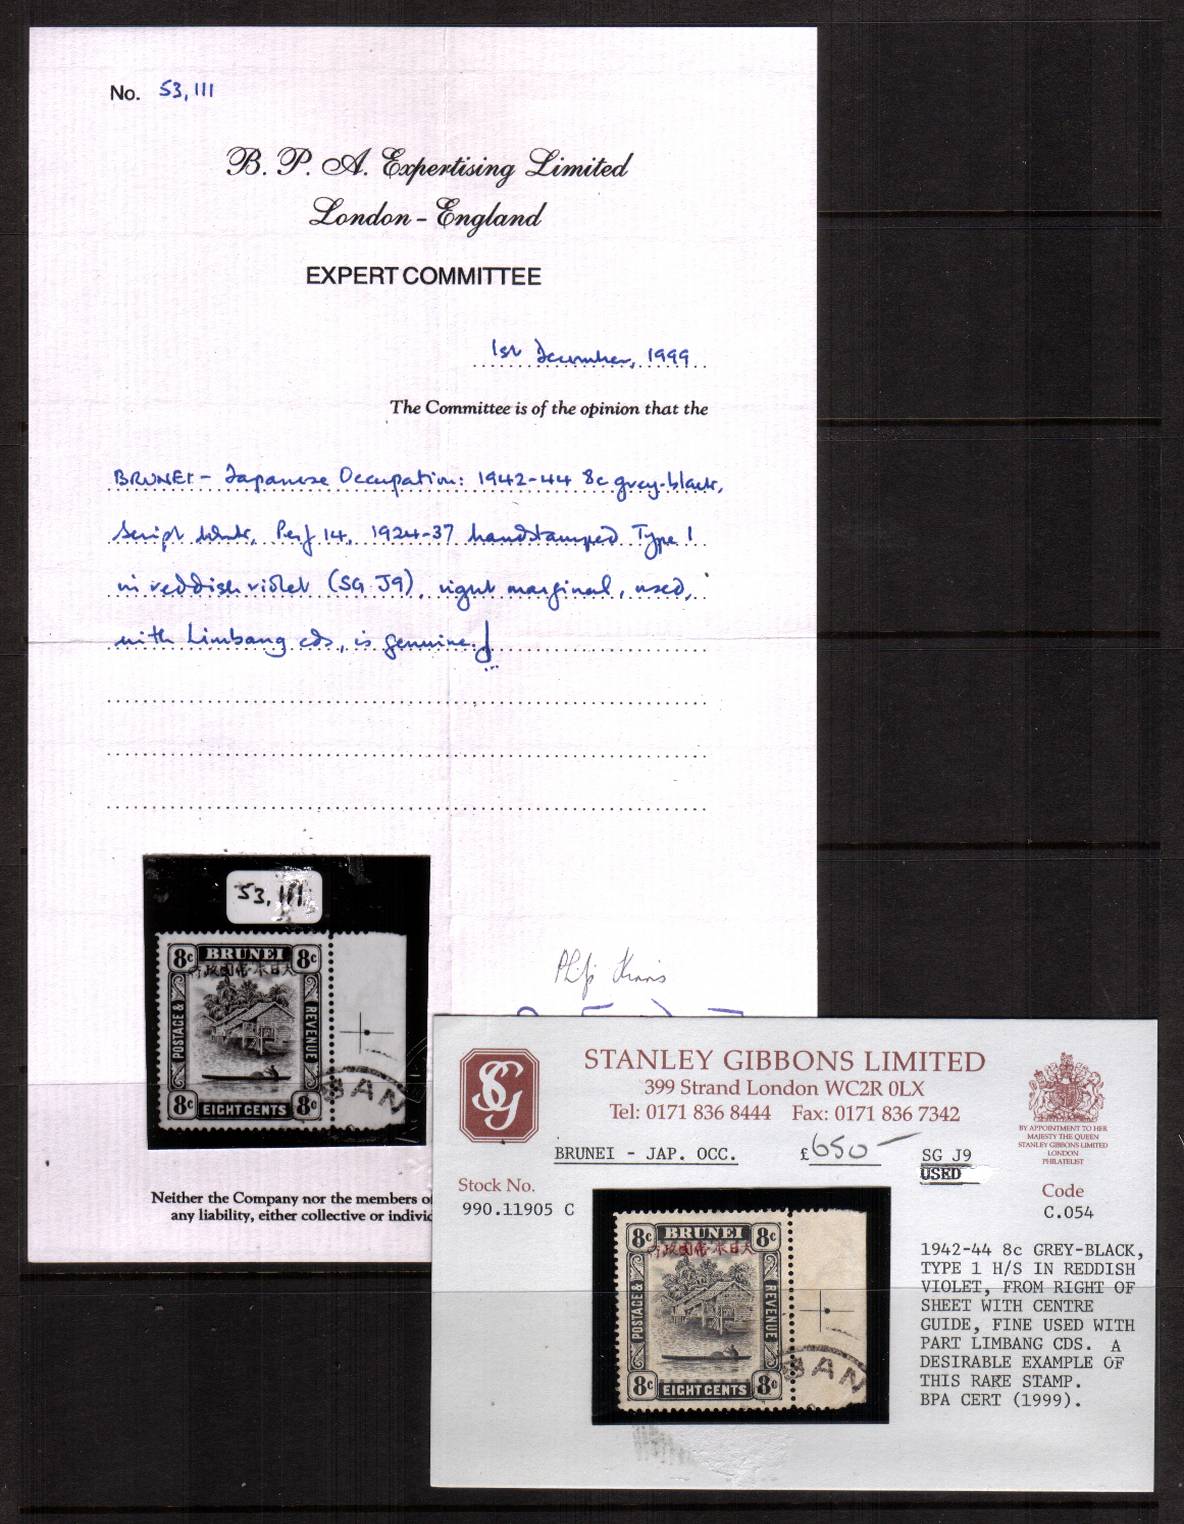 8c Grey-Black Type 1 handstamp in Reddish Violet.<br/>A superb fine used marginal stamp cancelled with a LIMBANG CDS. With BPA certificate and SG stockcard sold to previous owner over 20 years ago! Rare!! SG Cat 900  

<br/><b>QHX</b>